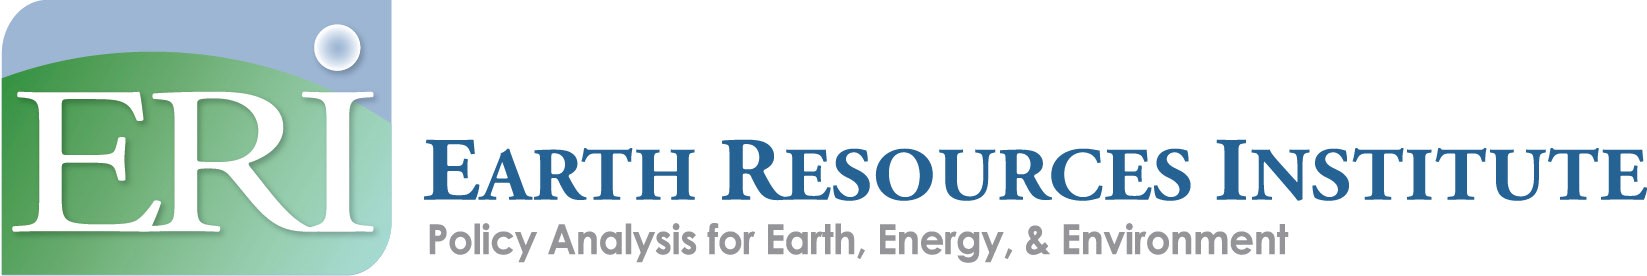 Mines Launches Earth Resources Institute